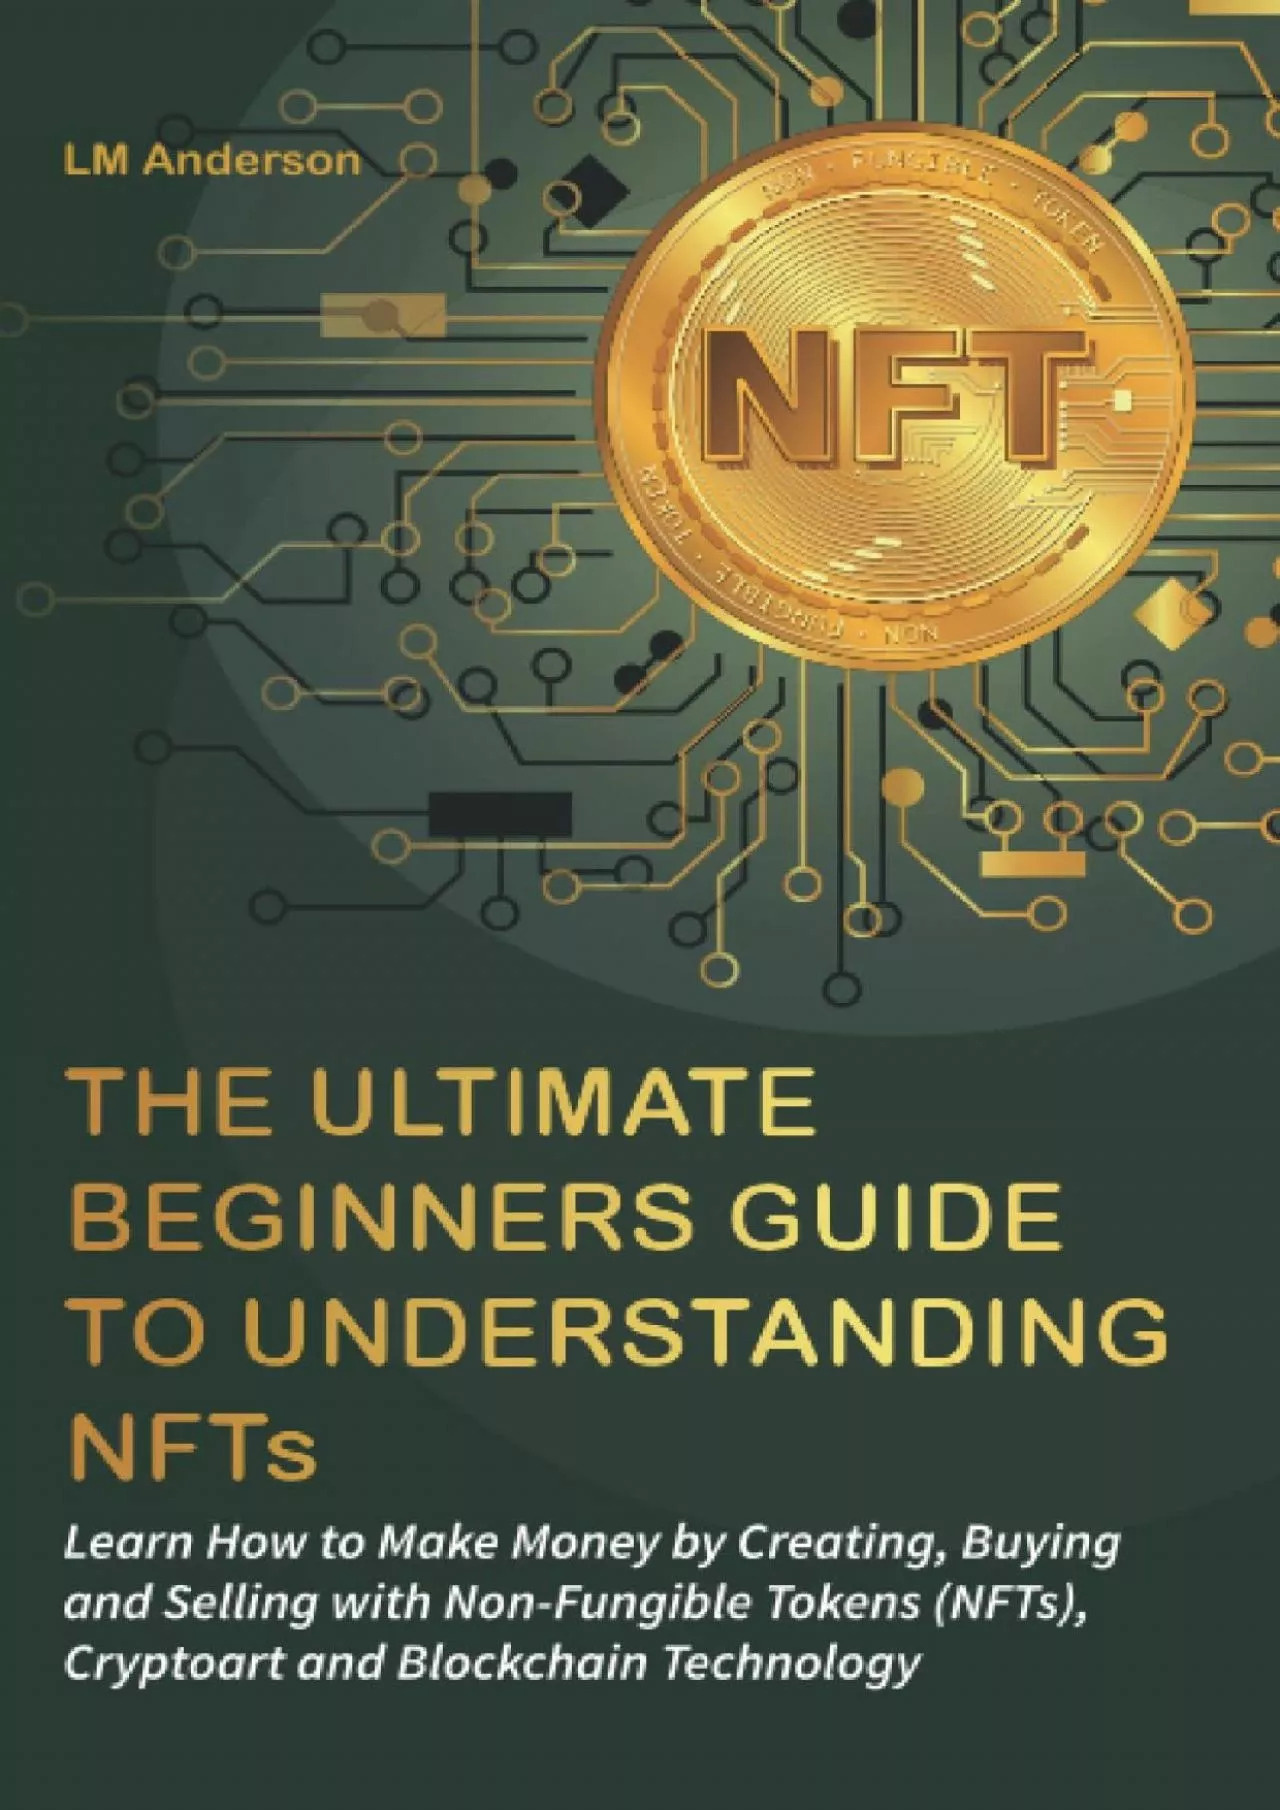 (BOOK)-The Ultimate Beginners Guide to Understanding NFTs: Learn How to Make Money by